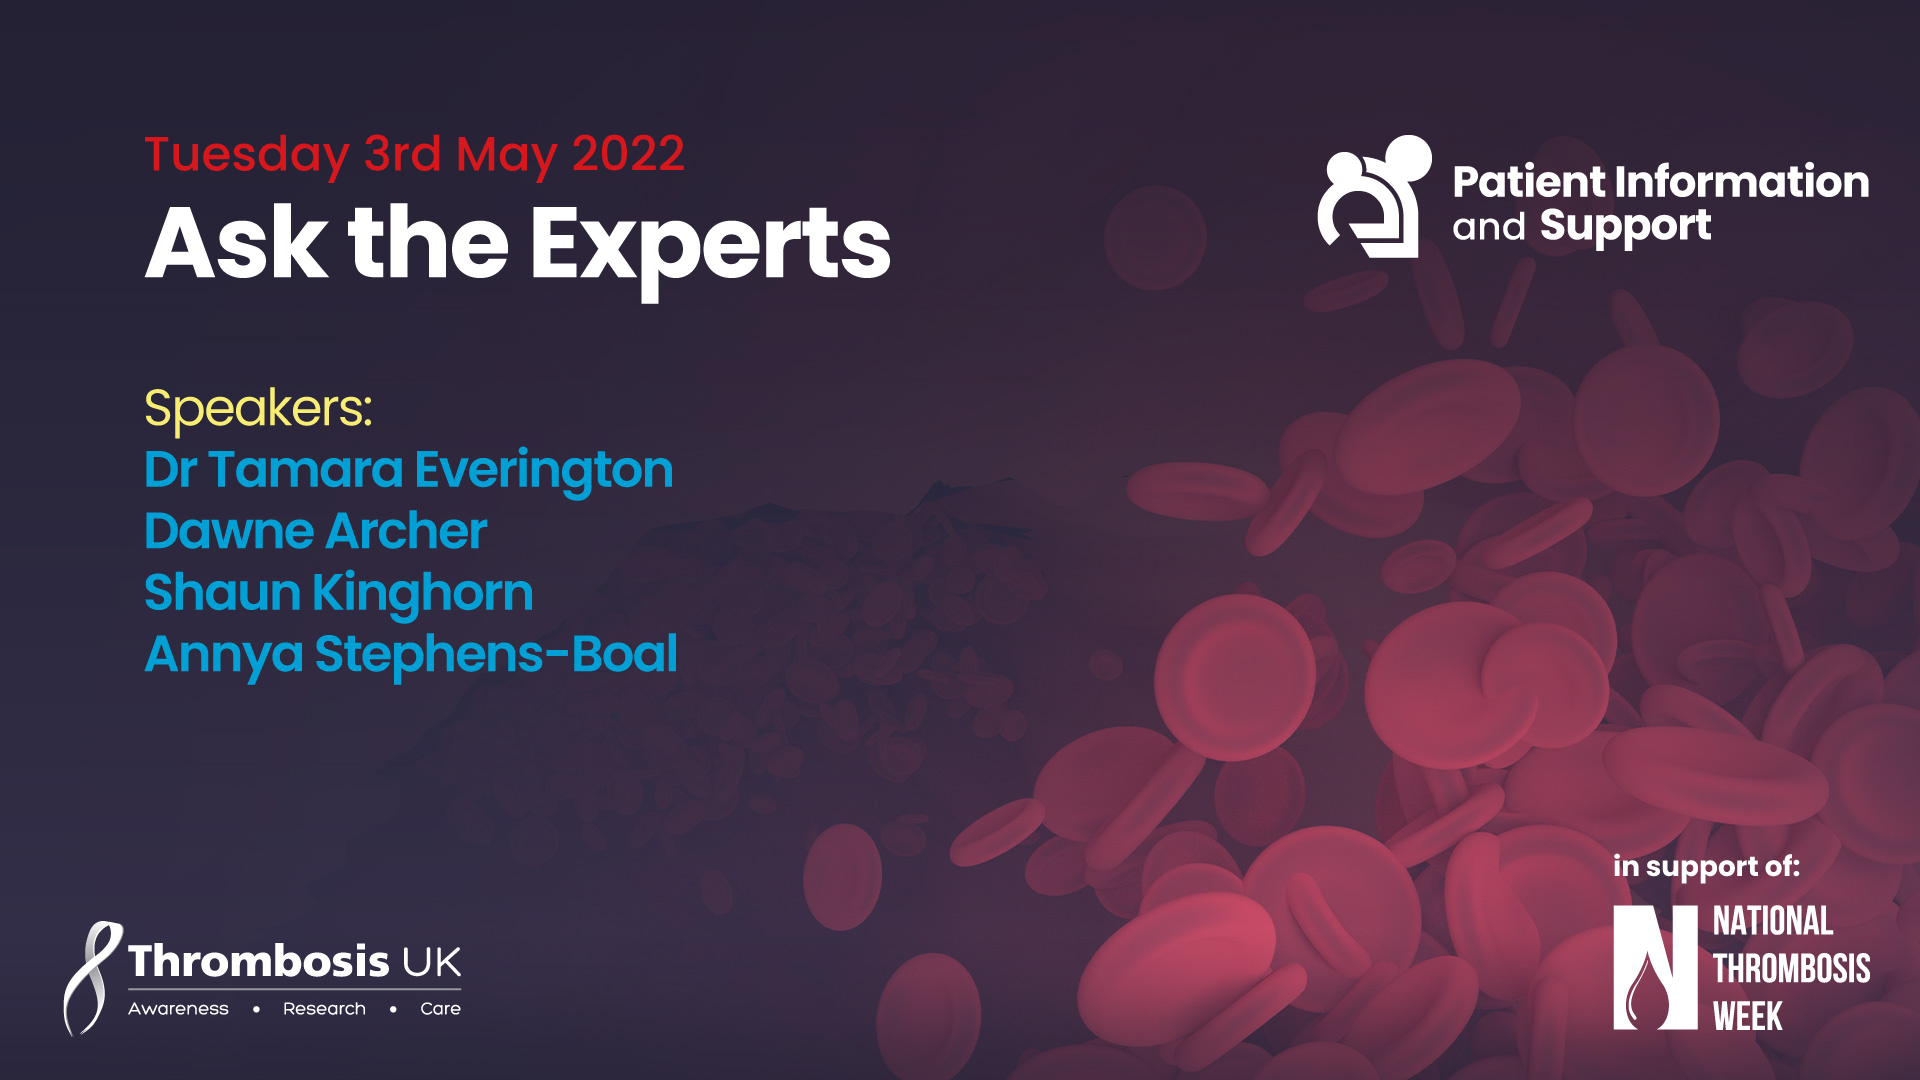 National Thrombosis Week 2022 - Ask the Experts